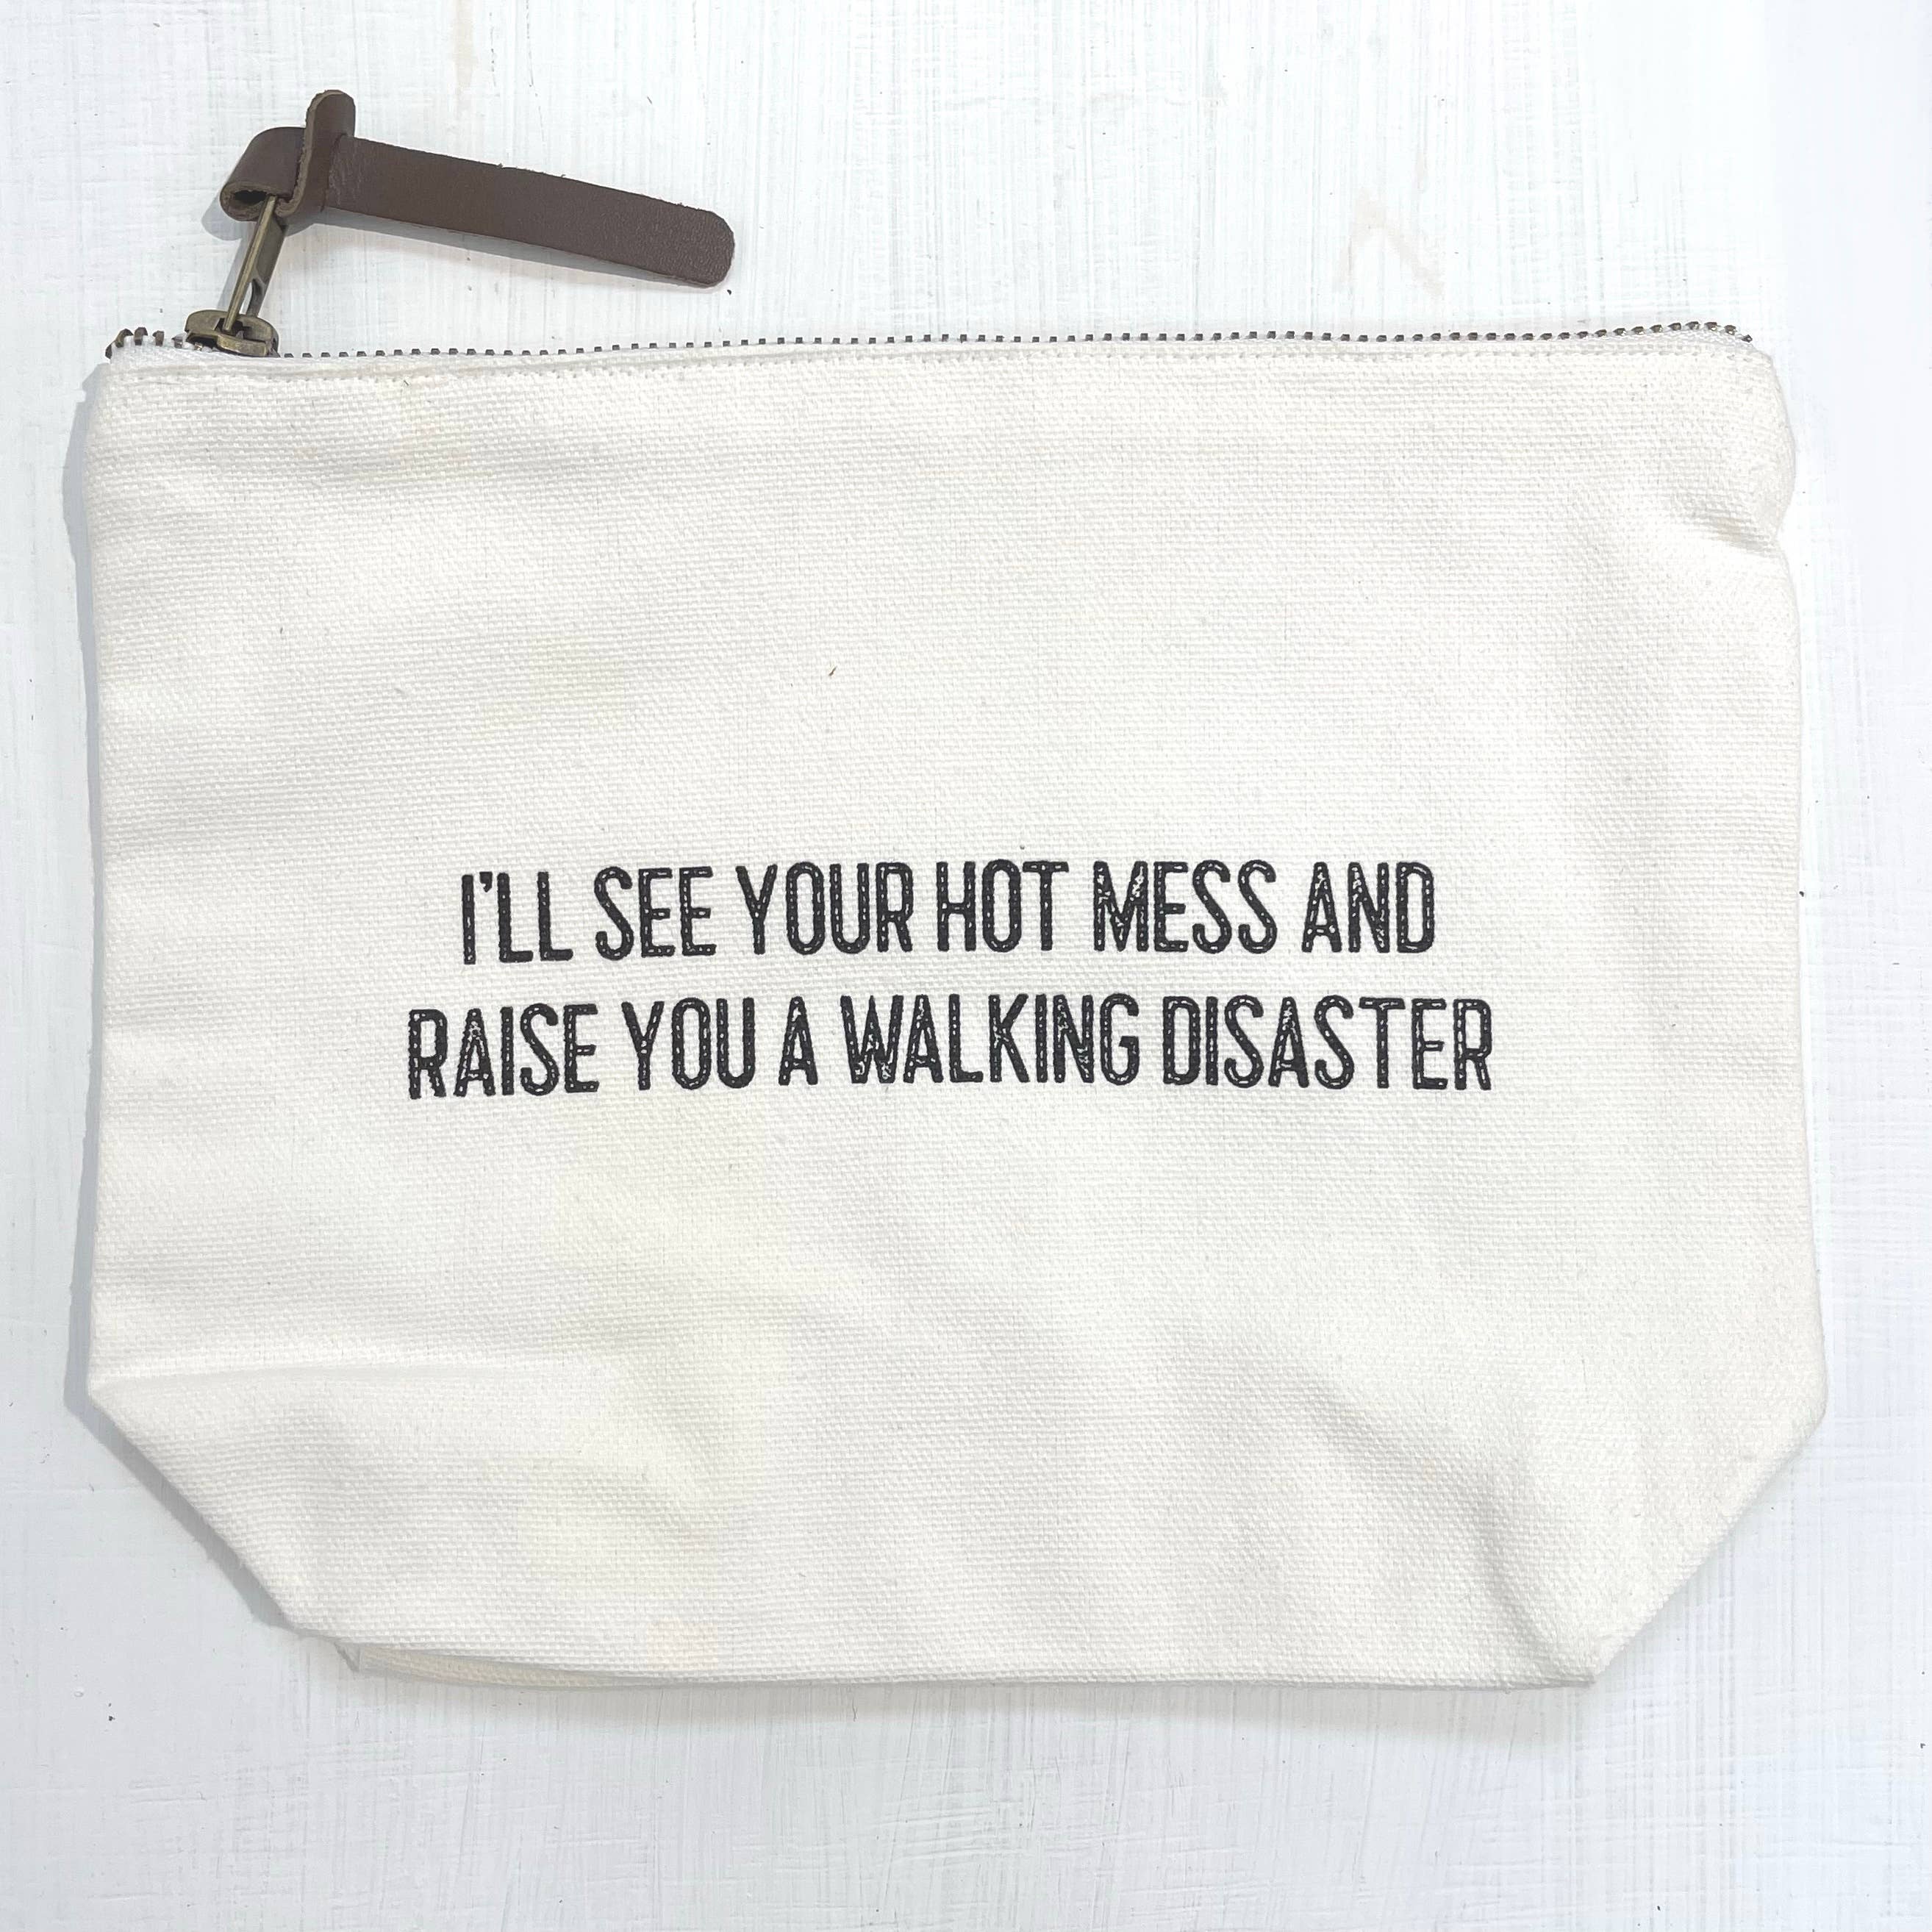 Bag of All the Fucks I Give Funny Stash Bag Funny Makeup Bags Cosmetics Bag  Funny Pouches Gifts for Friends Adult Humor Gift 